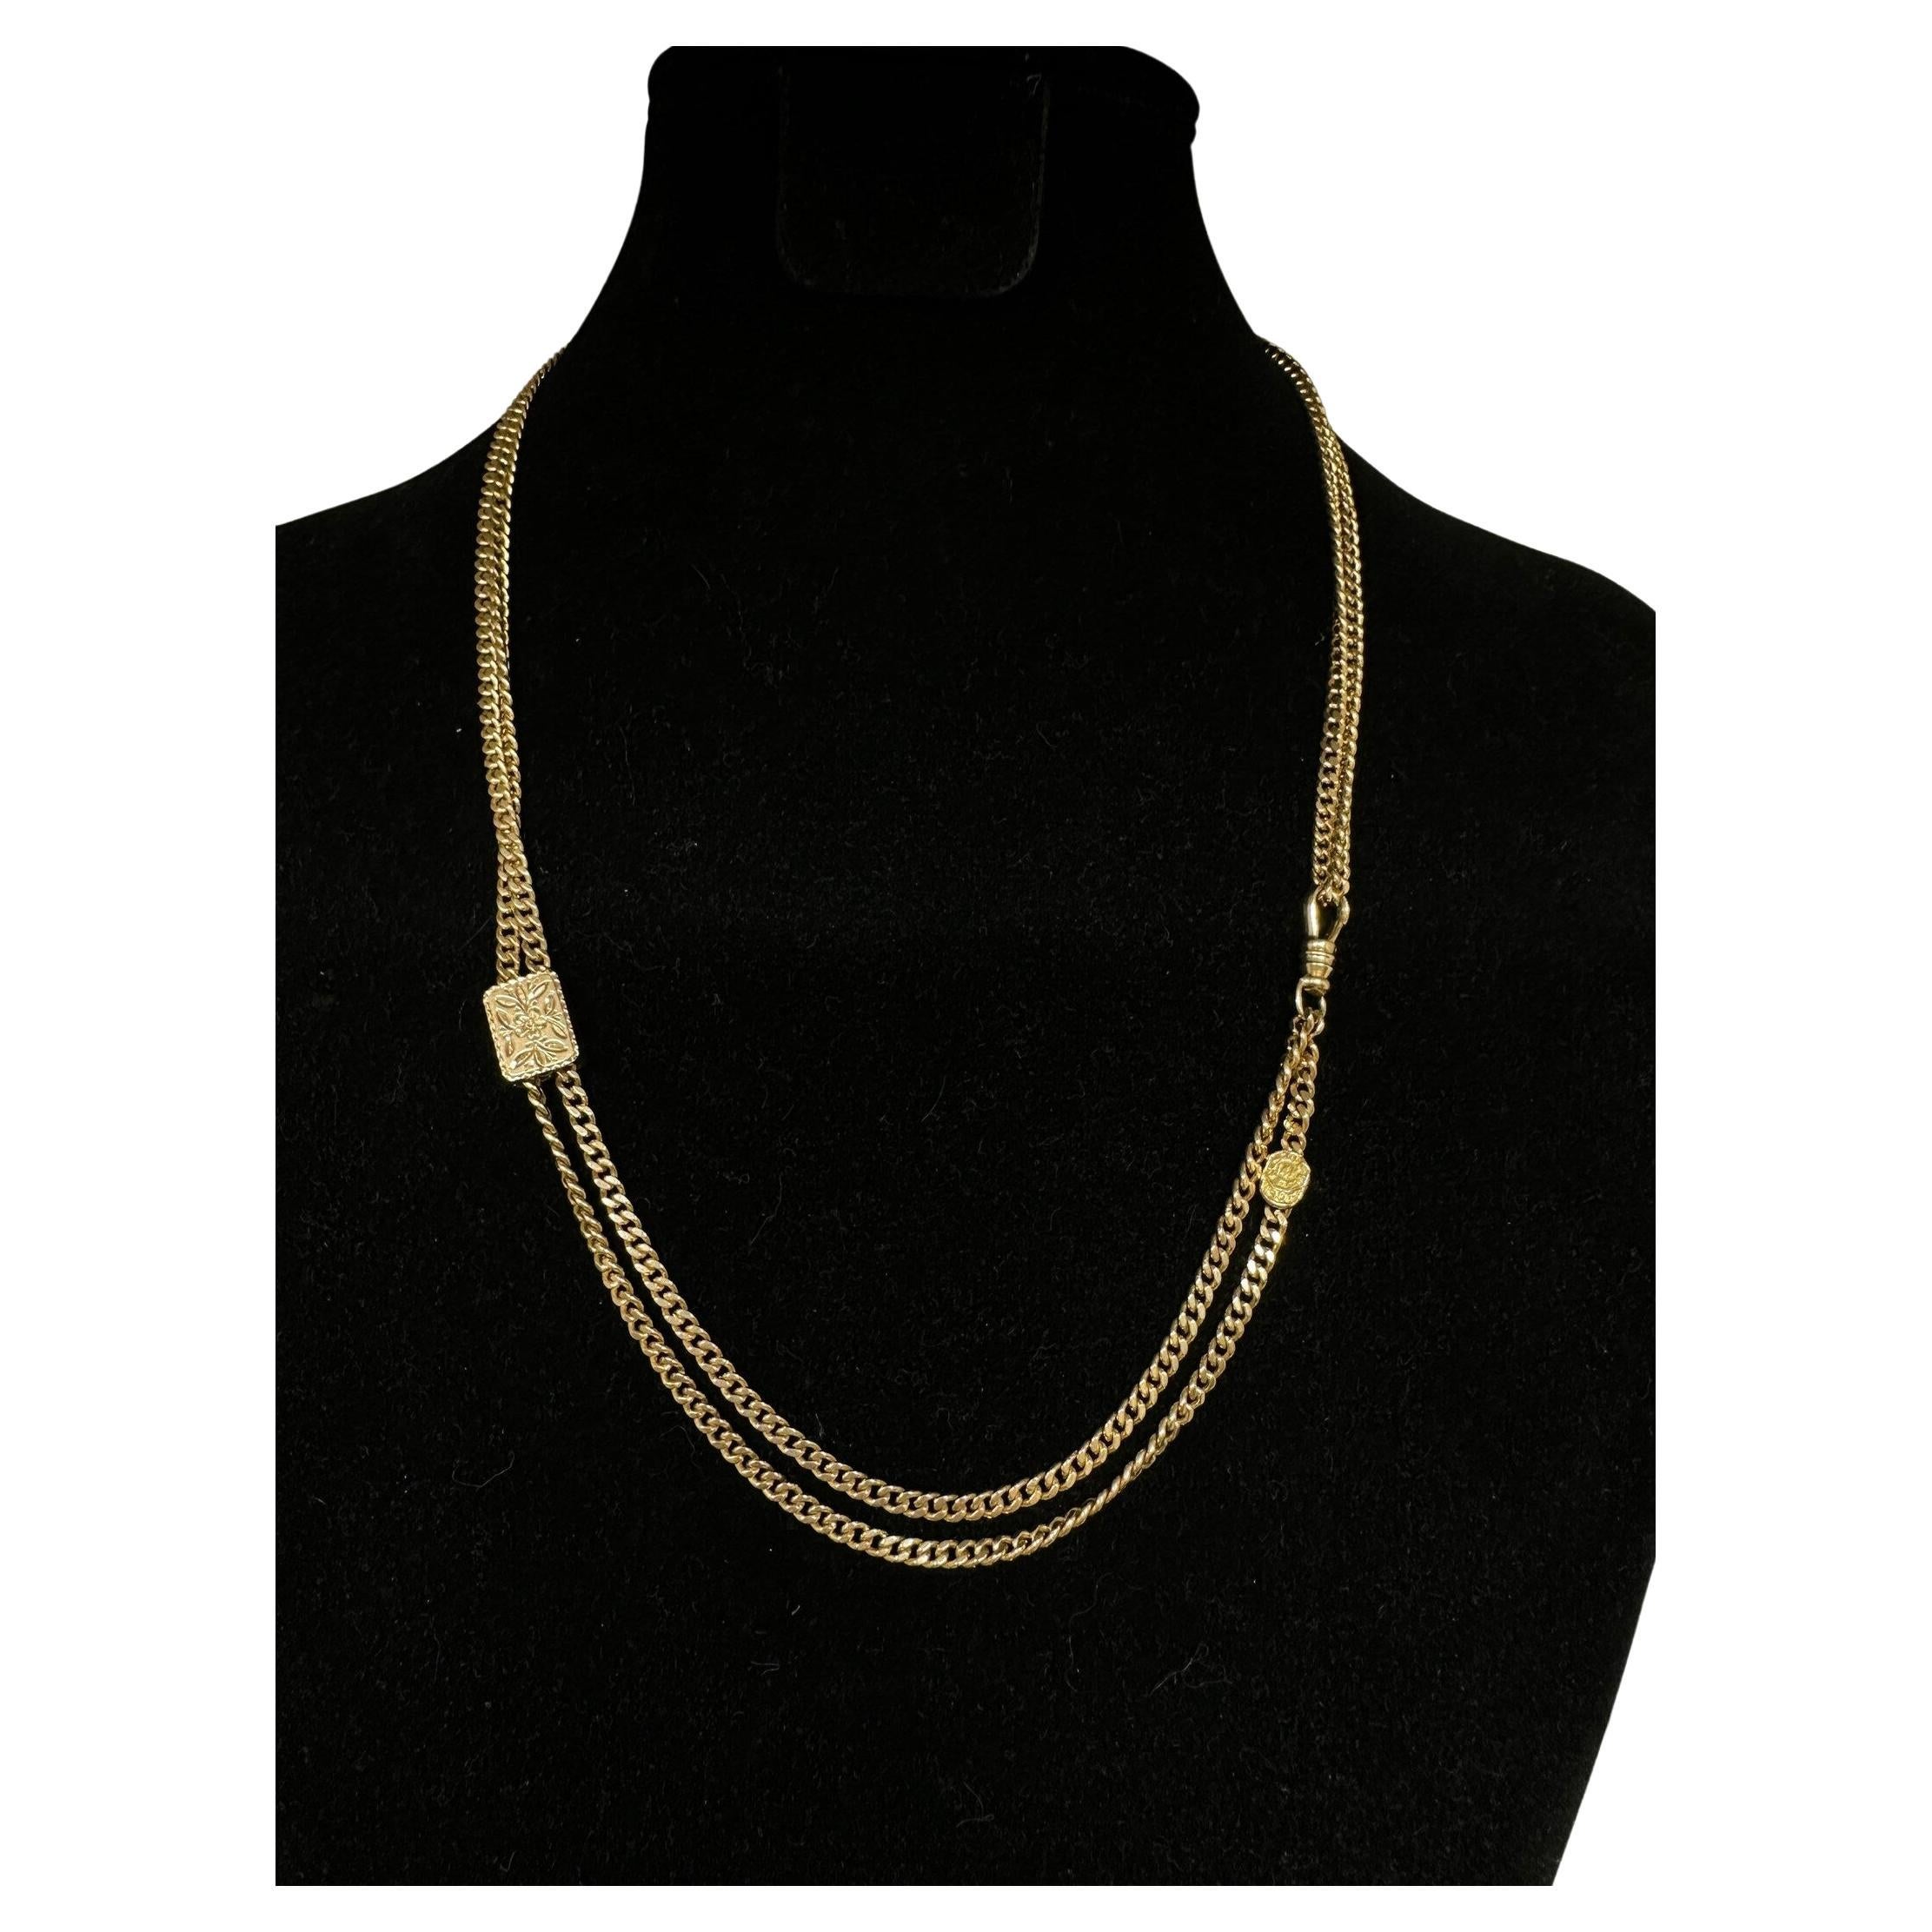 This stunning antique 14k yellow gold curb link long chain with slider is a chain lovers delight. Move the engraved slide up and down to create different styles and lengths of the necklace. A favorite charm, pendant or watch may be added on the dog